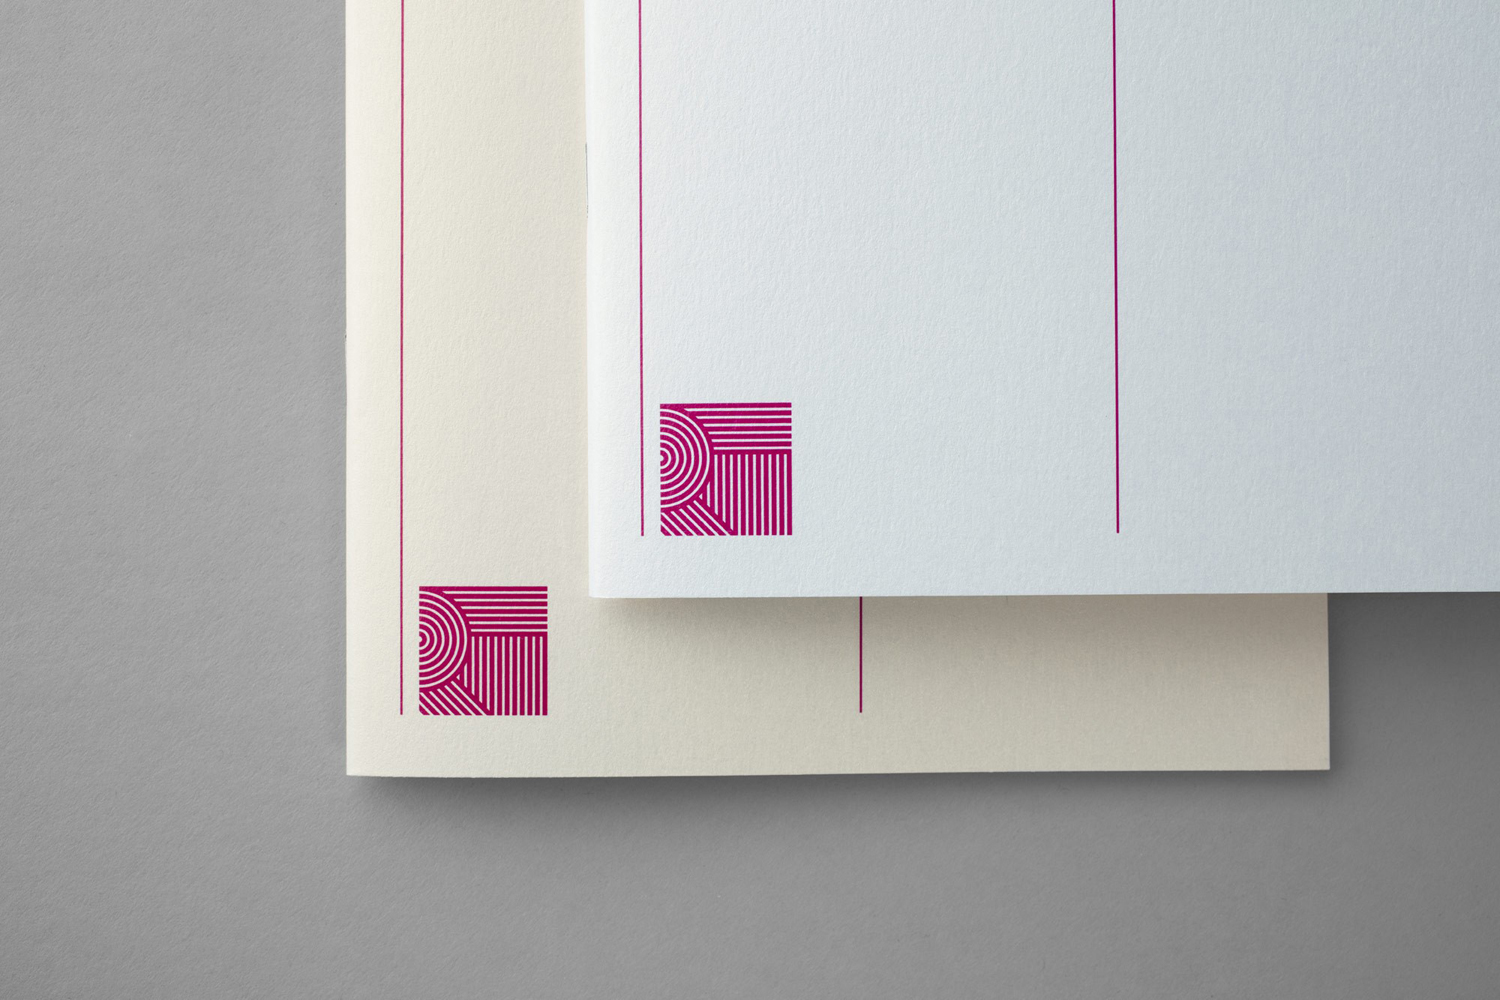 Brand identity and print designed by Bunch for London based public relations company Rush Talent